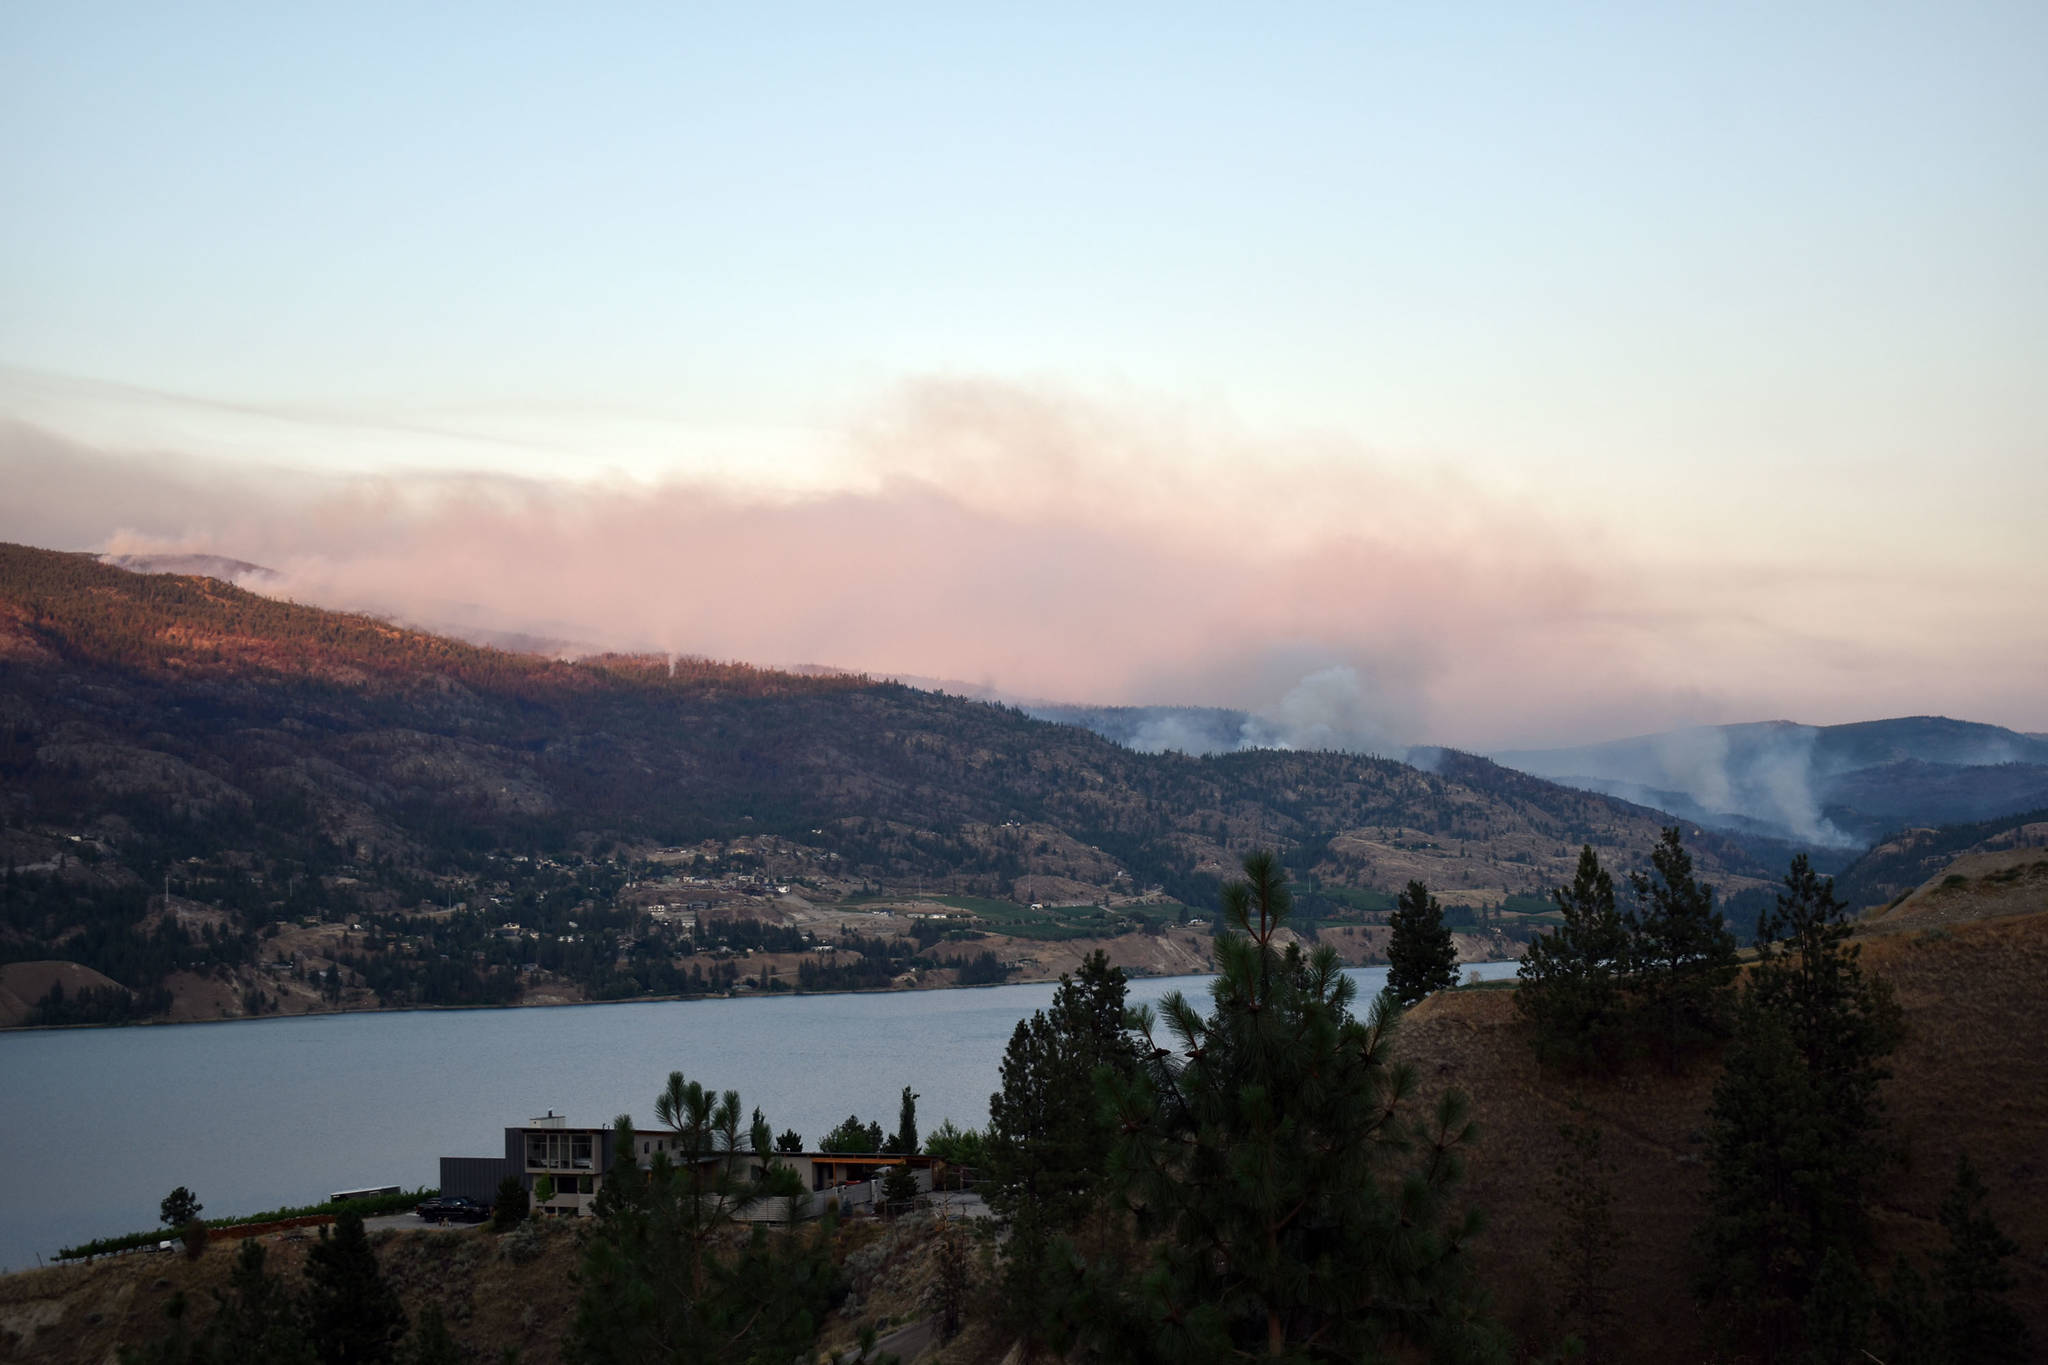 The Thomas Creek Fire seen from the view point between Penticton andKaleden on Thursday evening, July 15. (Brennan Phillips - Western News)